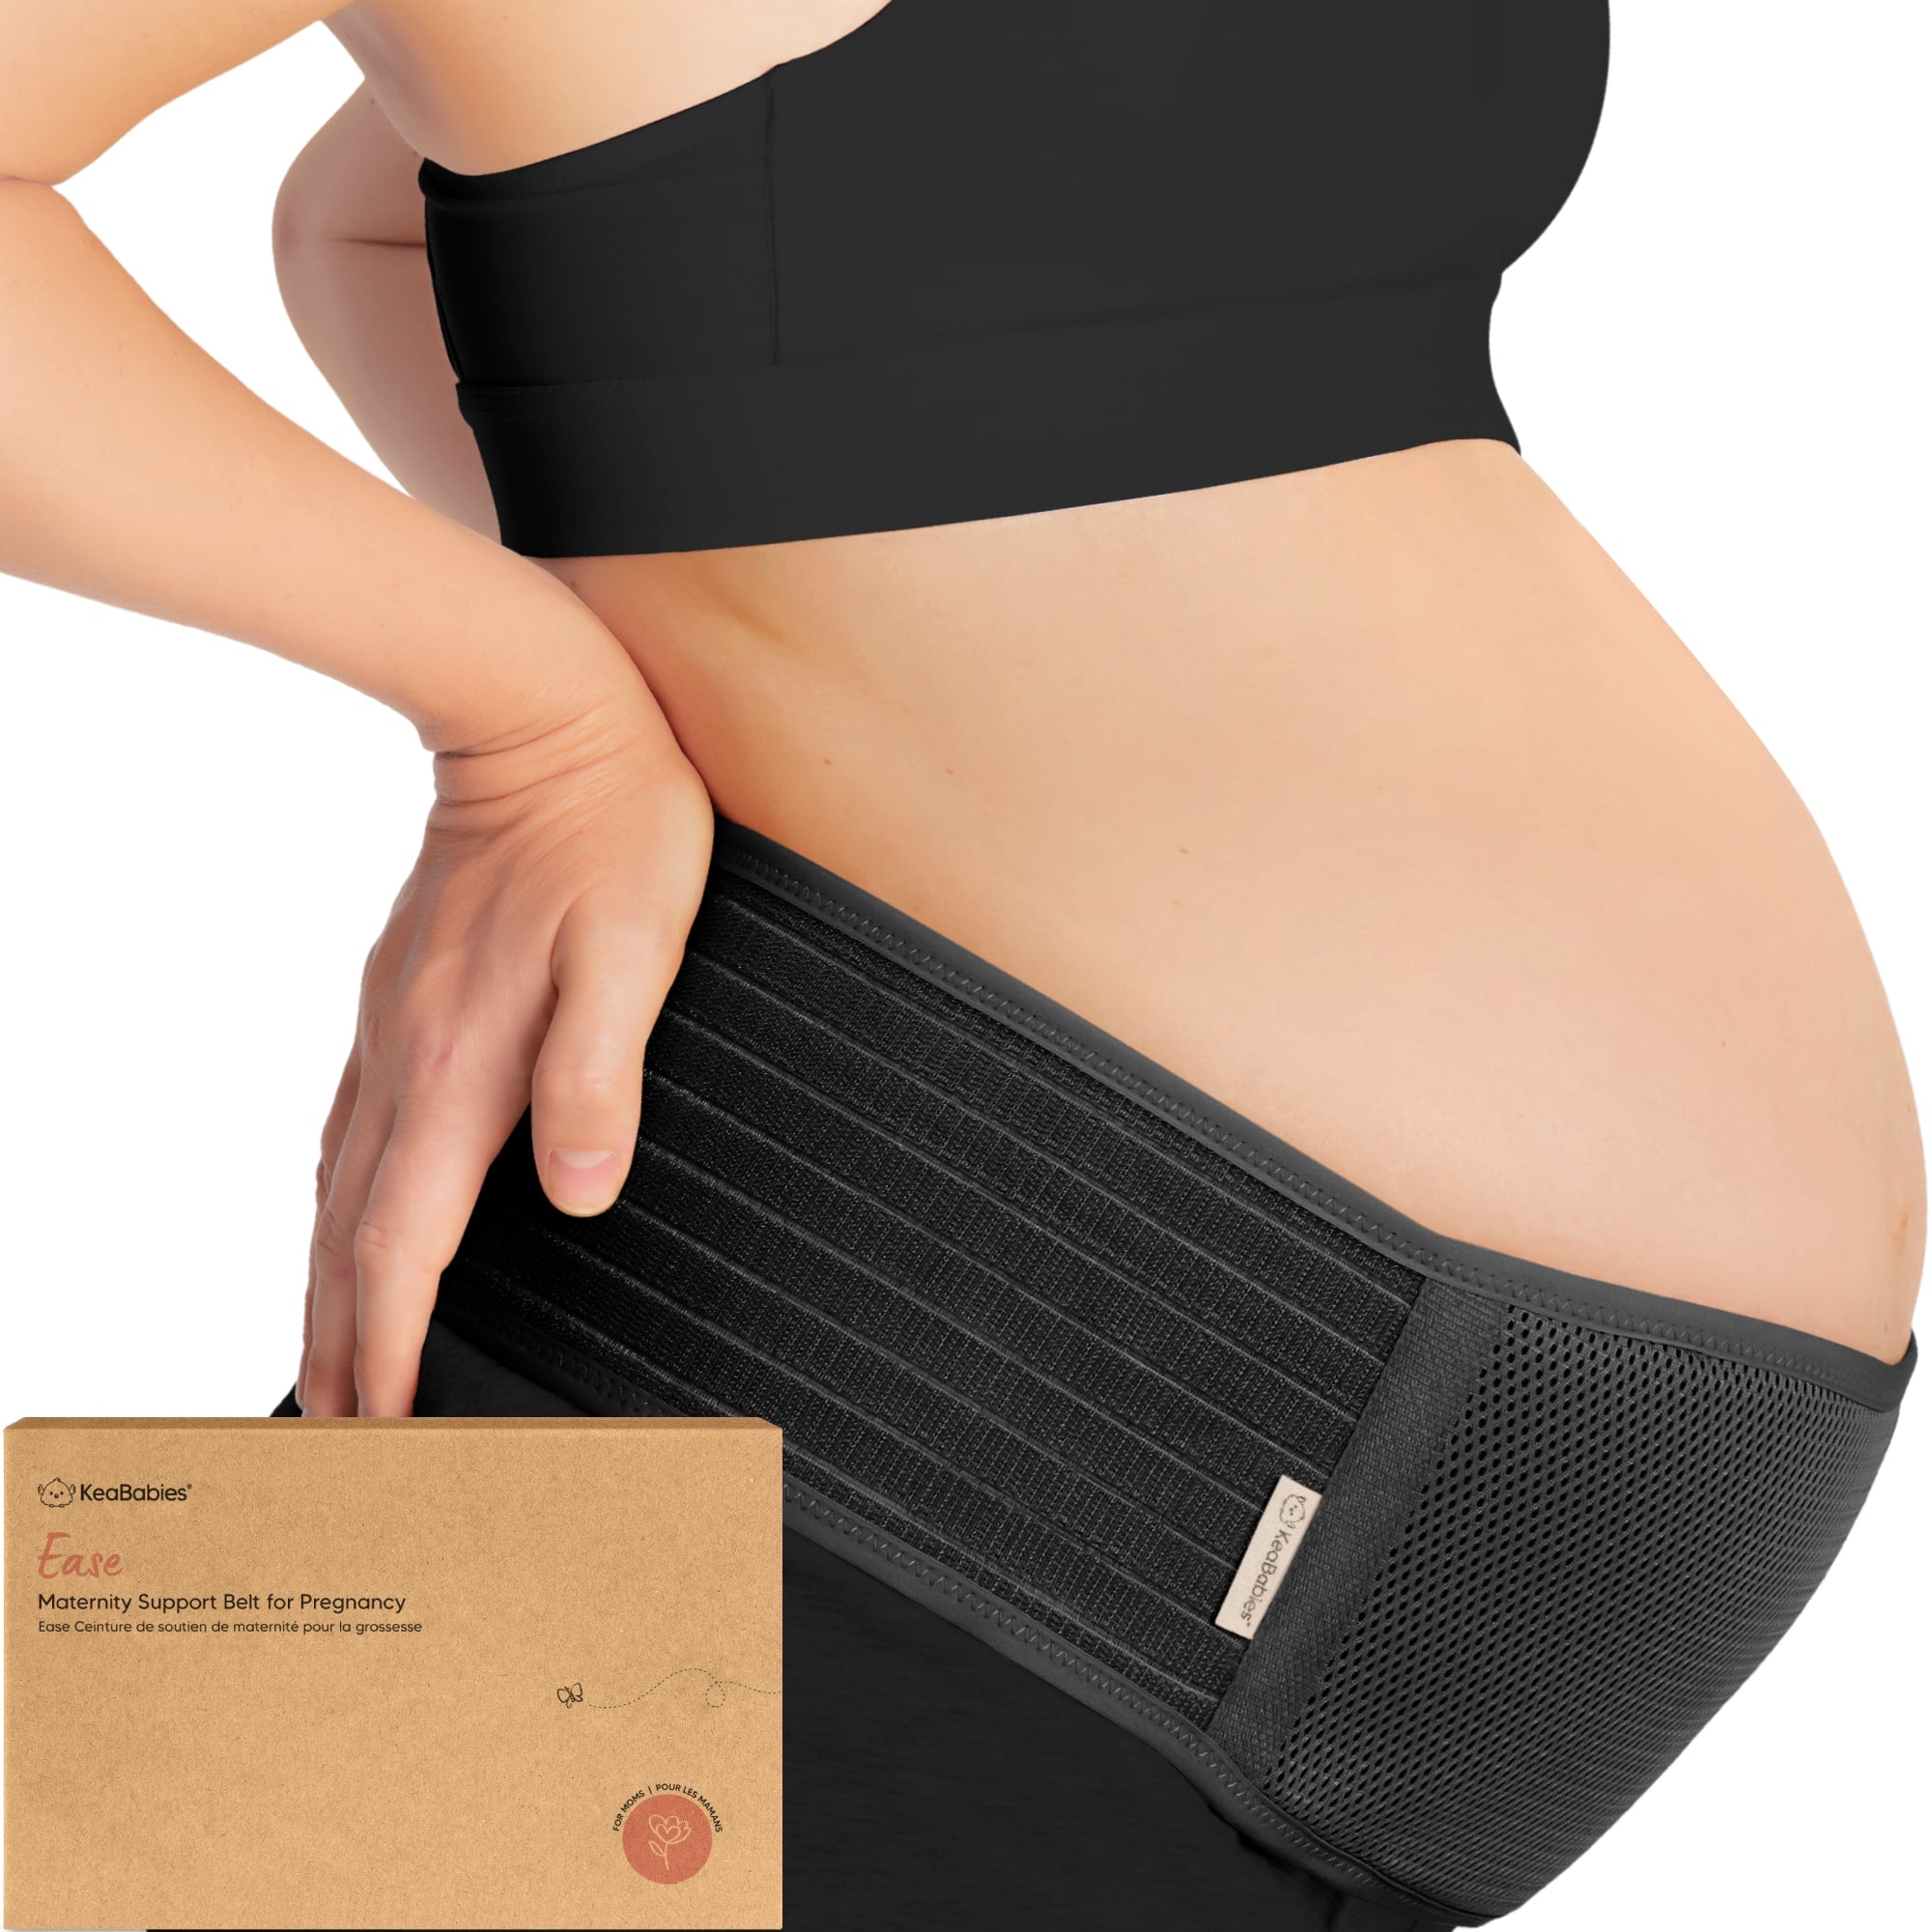 Baby Brace Pregnancy Support Belt - FREE Shipping